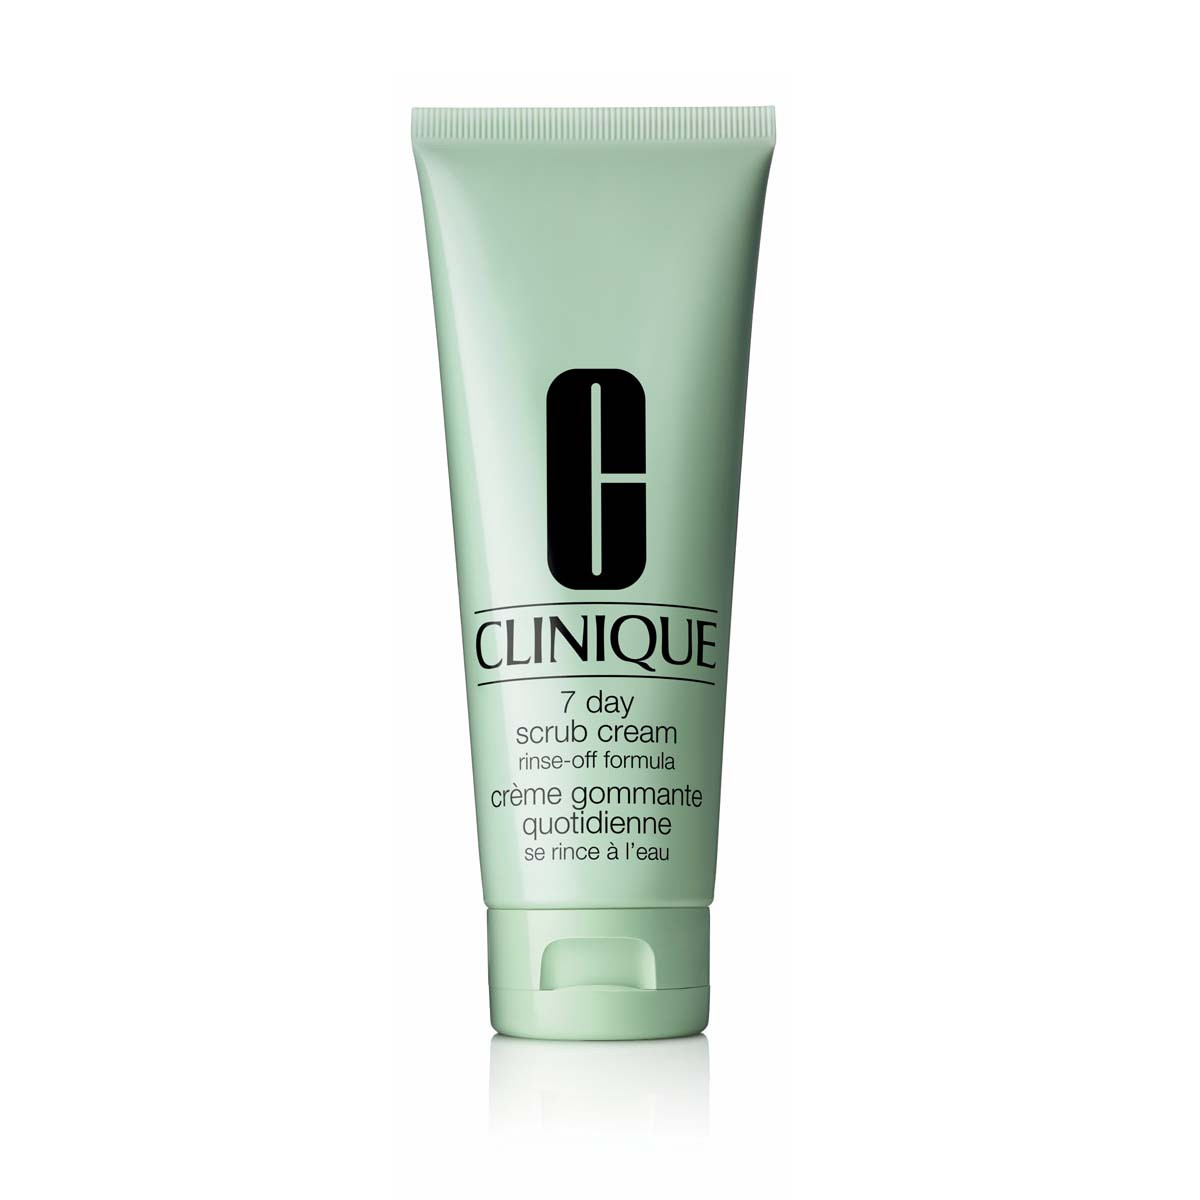 Clinique 7-day scrub rinse-off formula 100 ml, Verde, large image number 0